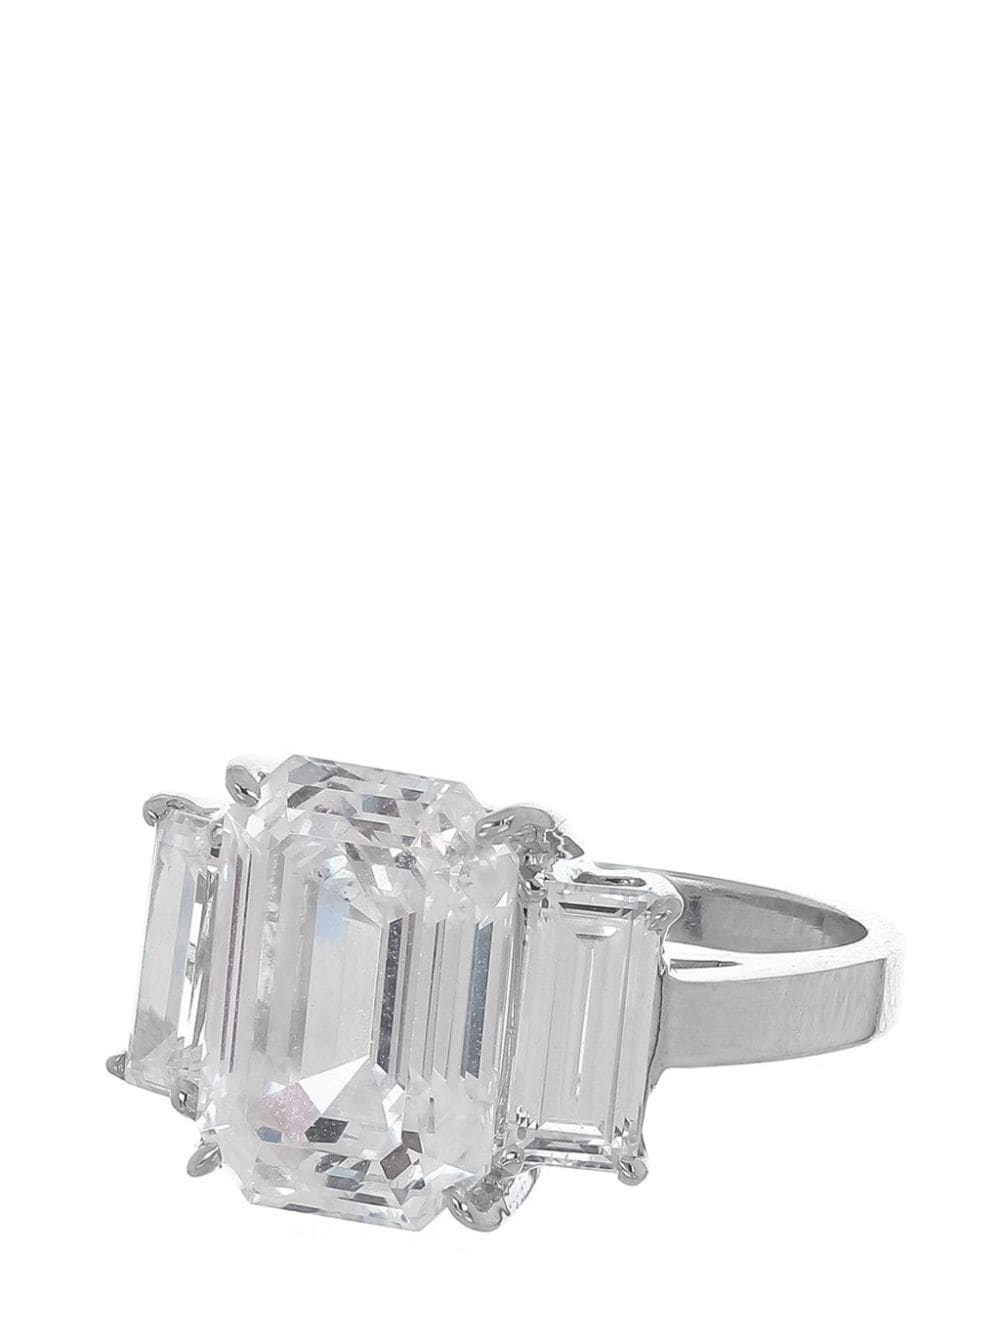 Shop Fantasia By Deserio 14kt White Gold Cubic Zirconia Ring